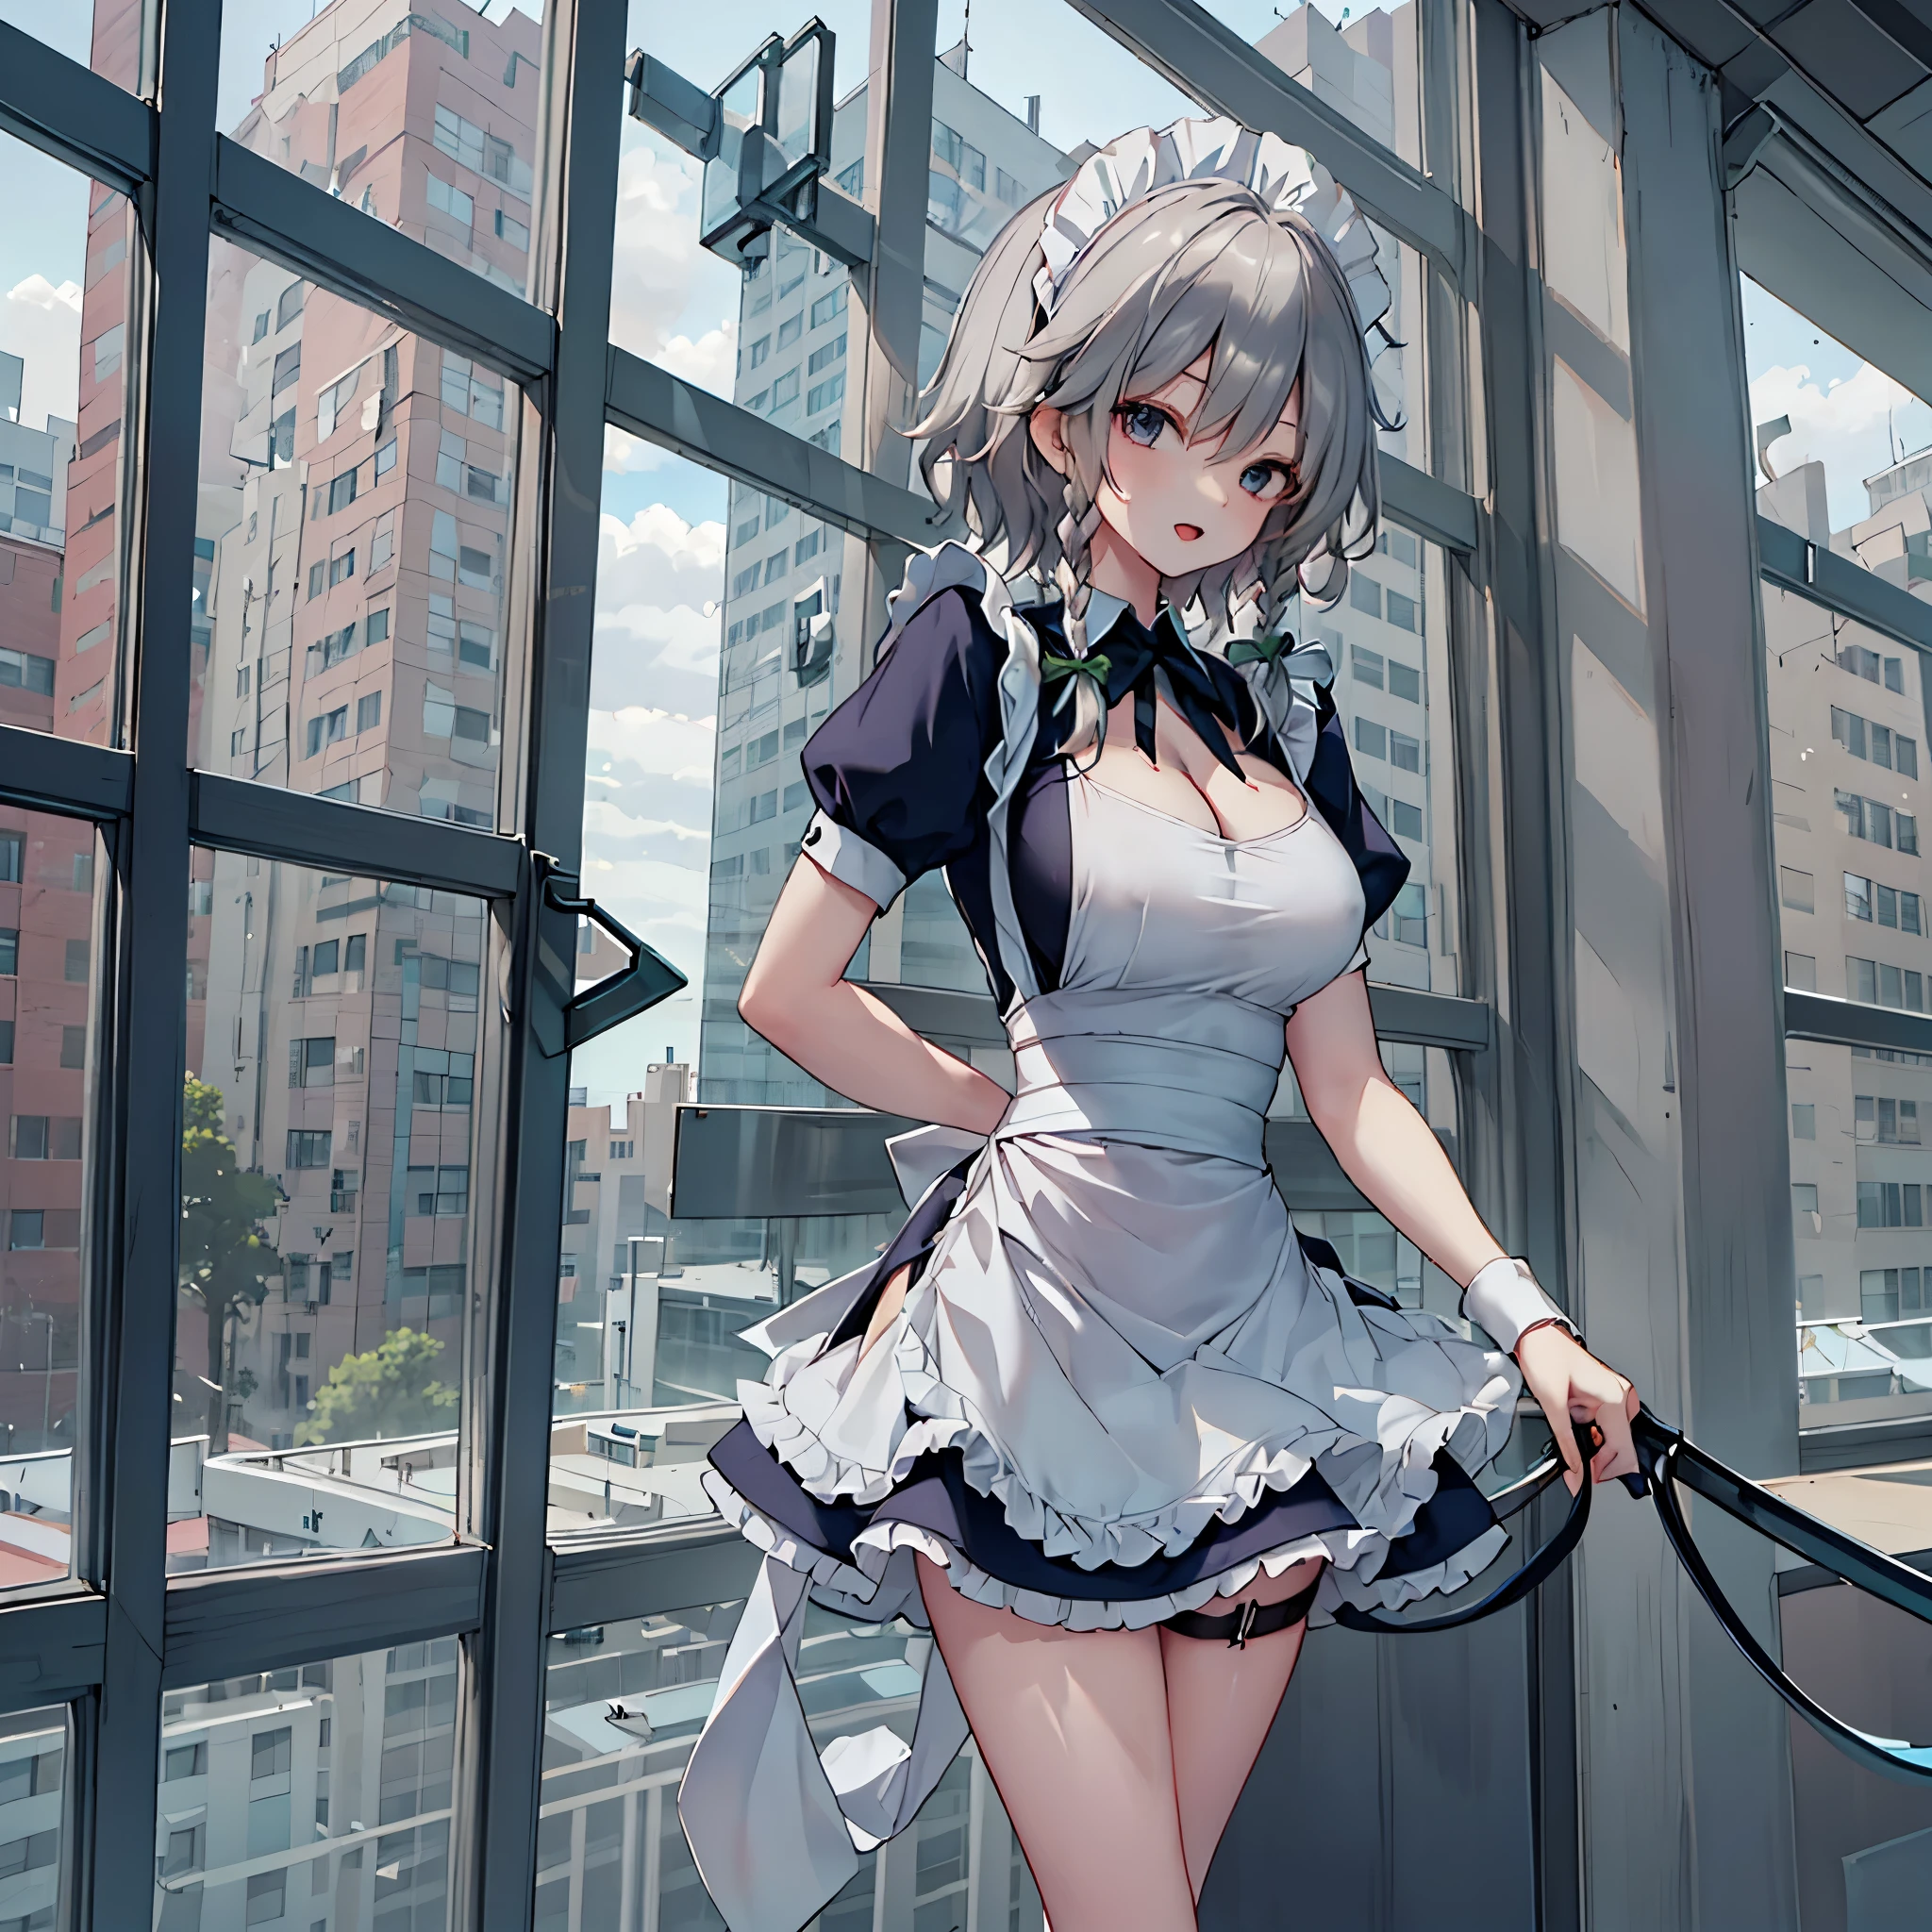 (solo Sakuya toho character standing at front of large glass windows), skinny, (open long legs wide:1.3), BREAK, (large perky breasts), (emphasize cleavage), (inconceivably thin narrow waist:1.6), short torso, thin long legs apart, arms behind back, arched back, emphasize thigh gap, BREAK, (very short maid dress) lifted breasts up, (maid dress cinches narrow waist too tight:1.4), cleavage cutouts wide, (too short skirt:1.3), highheels, tiptoe, (pigeon toed), smile for viewer, open mouth